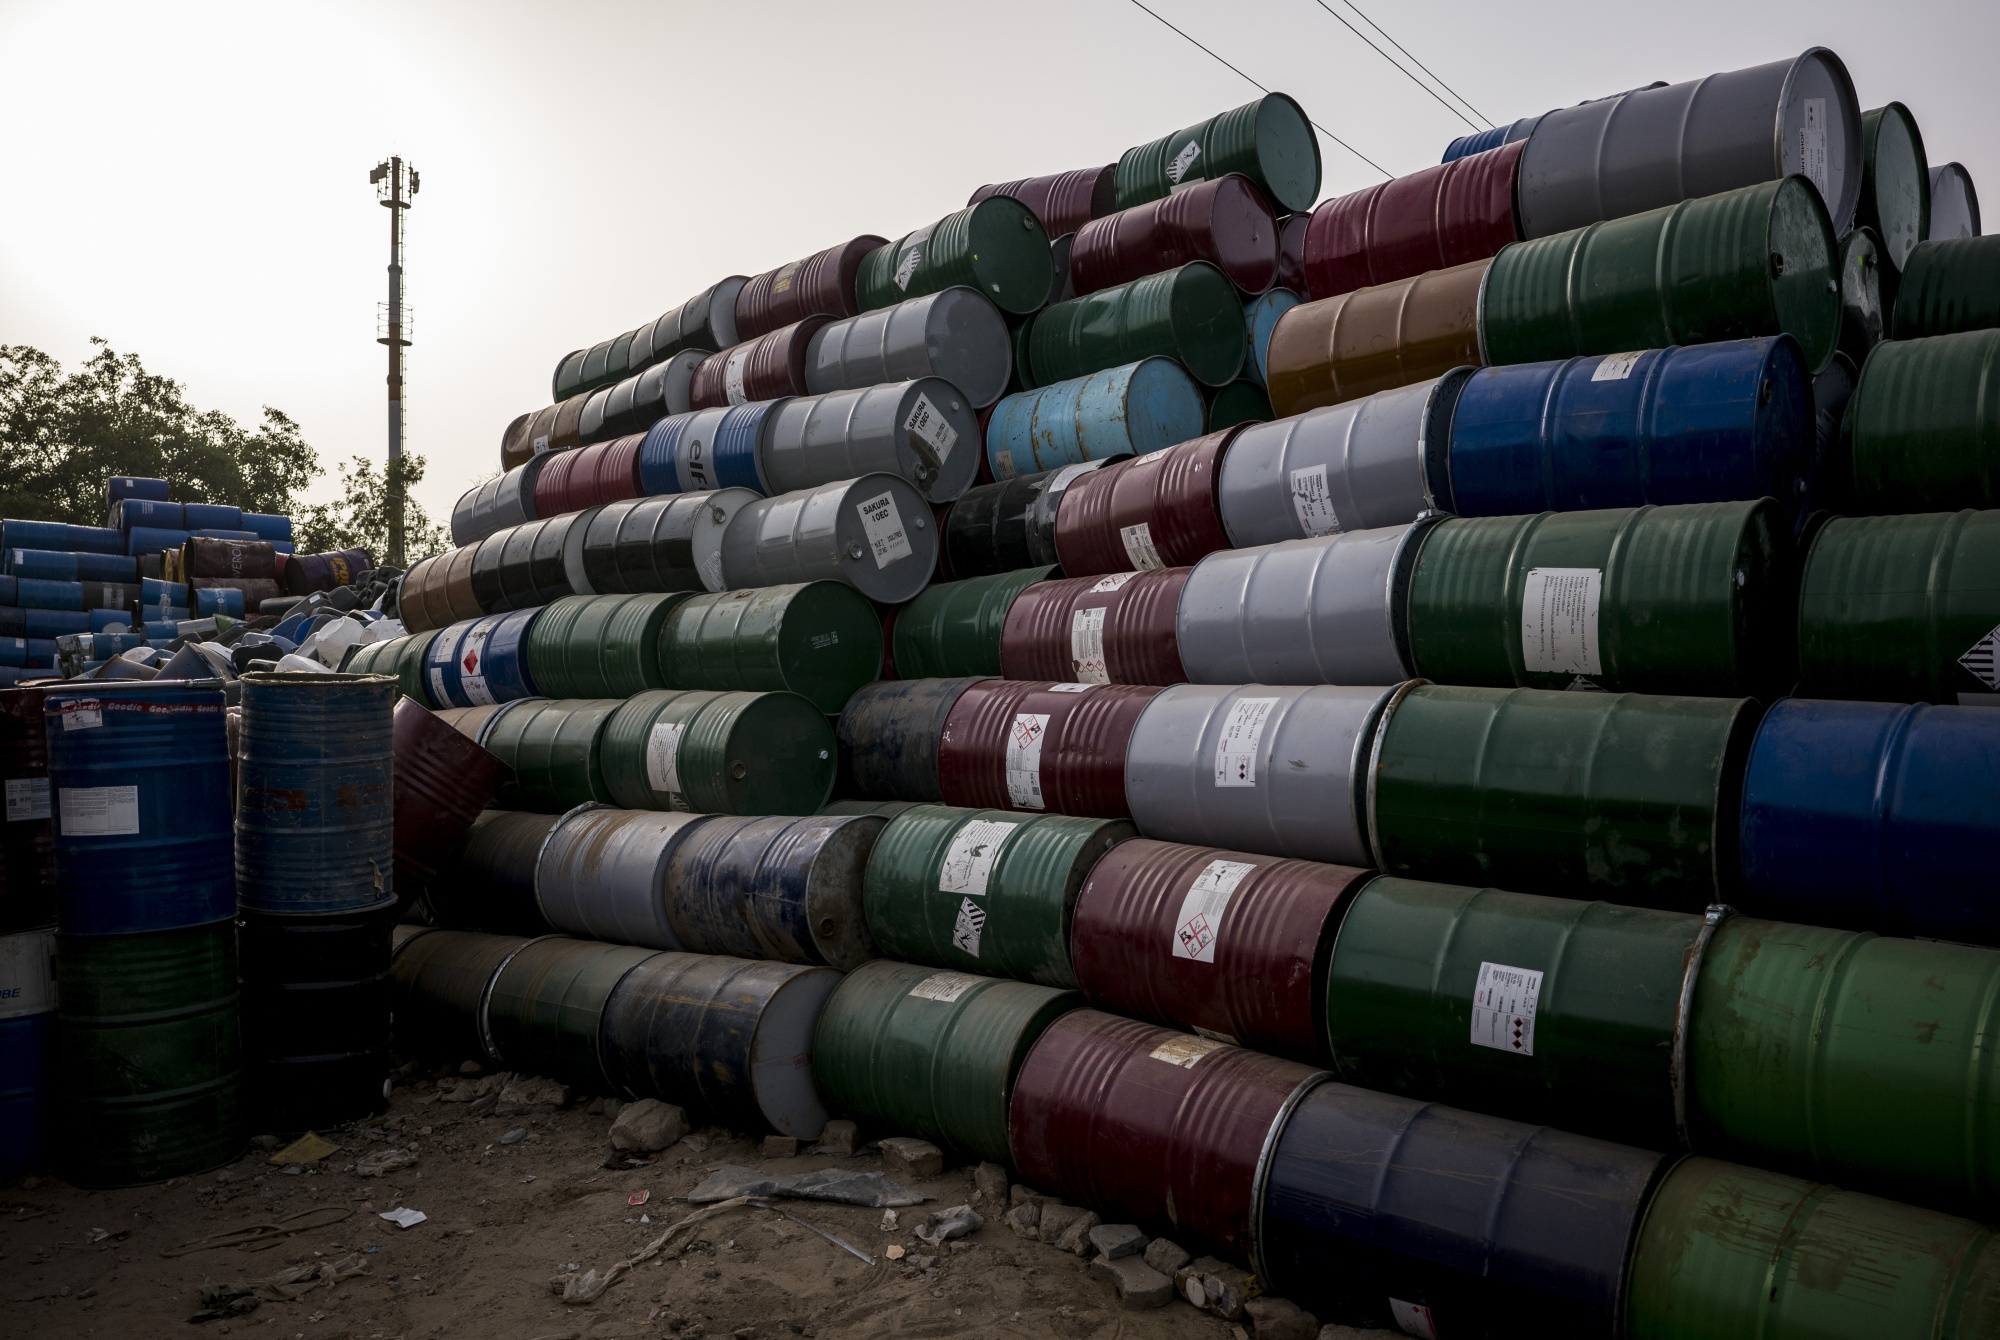 Oil bulls turned cautious before Middle East conflict